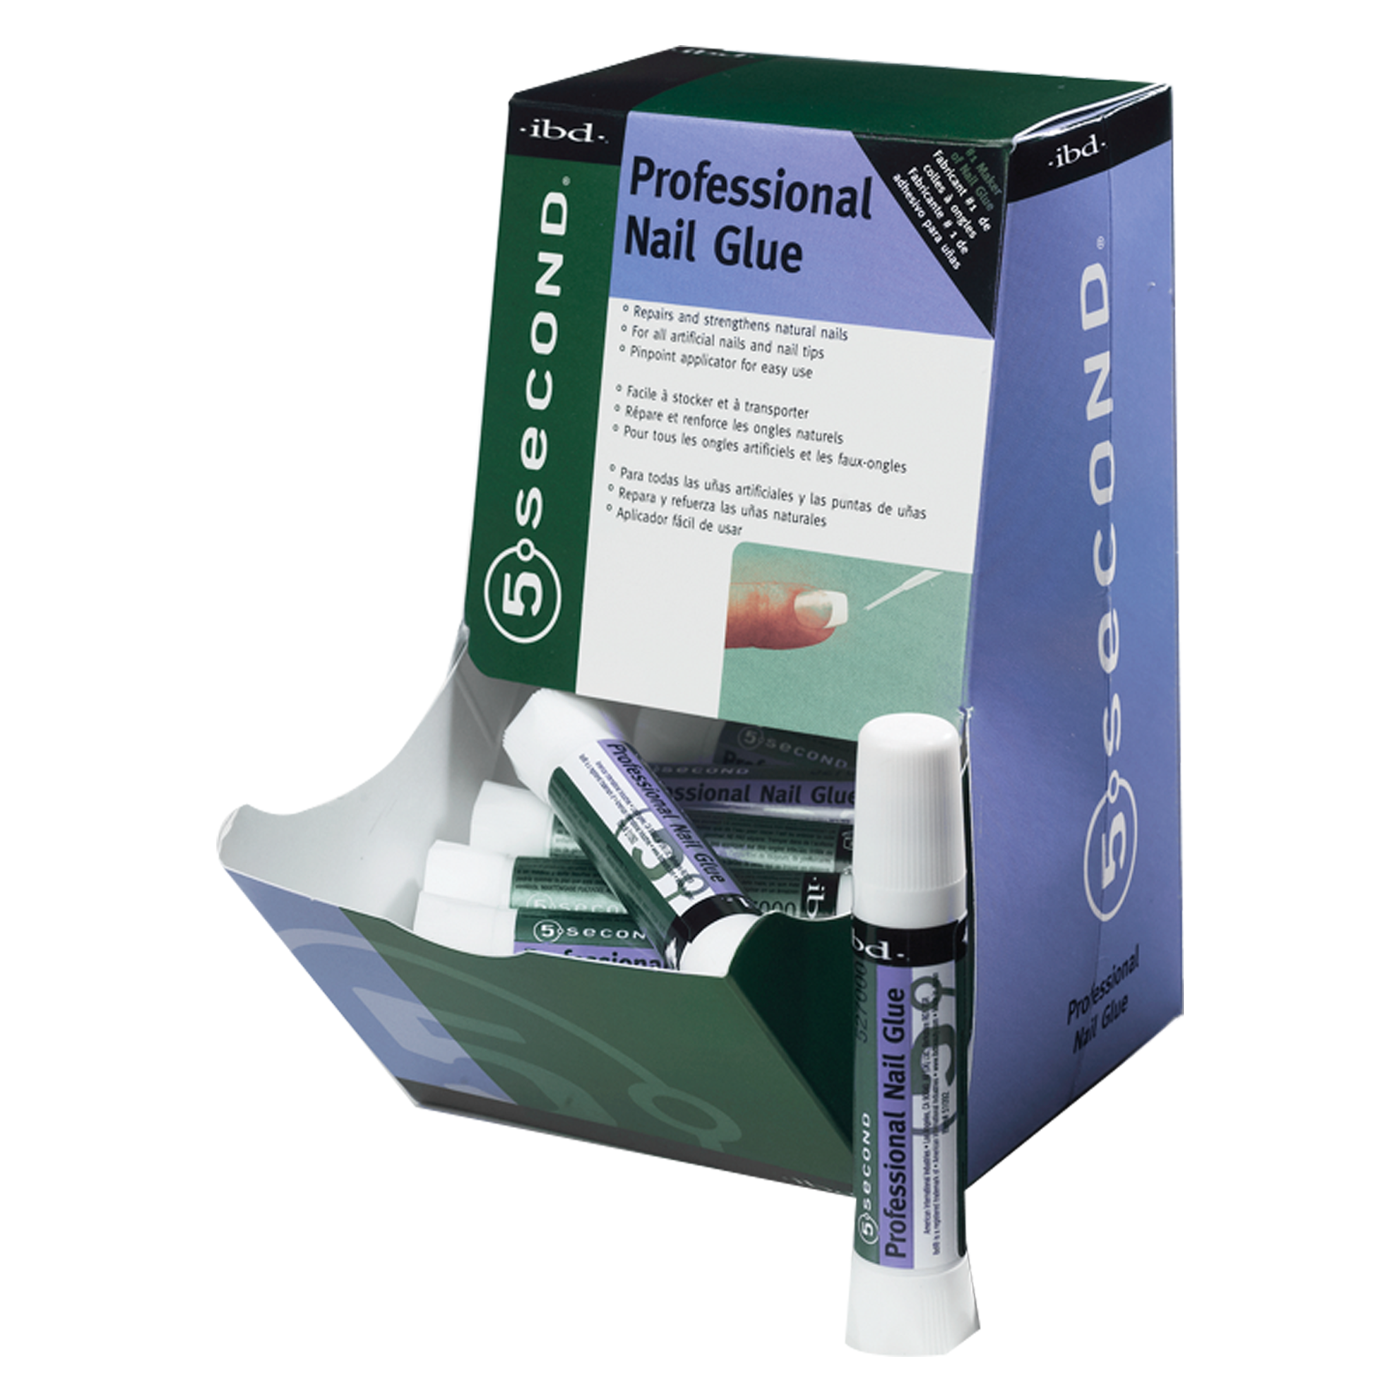 Nail Glue, 5 Second - Display of 12